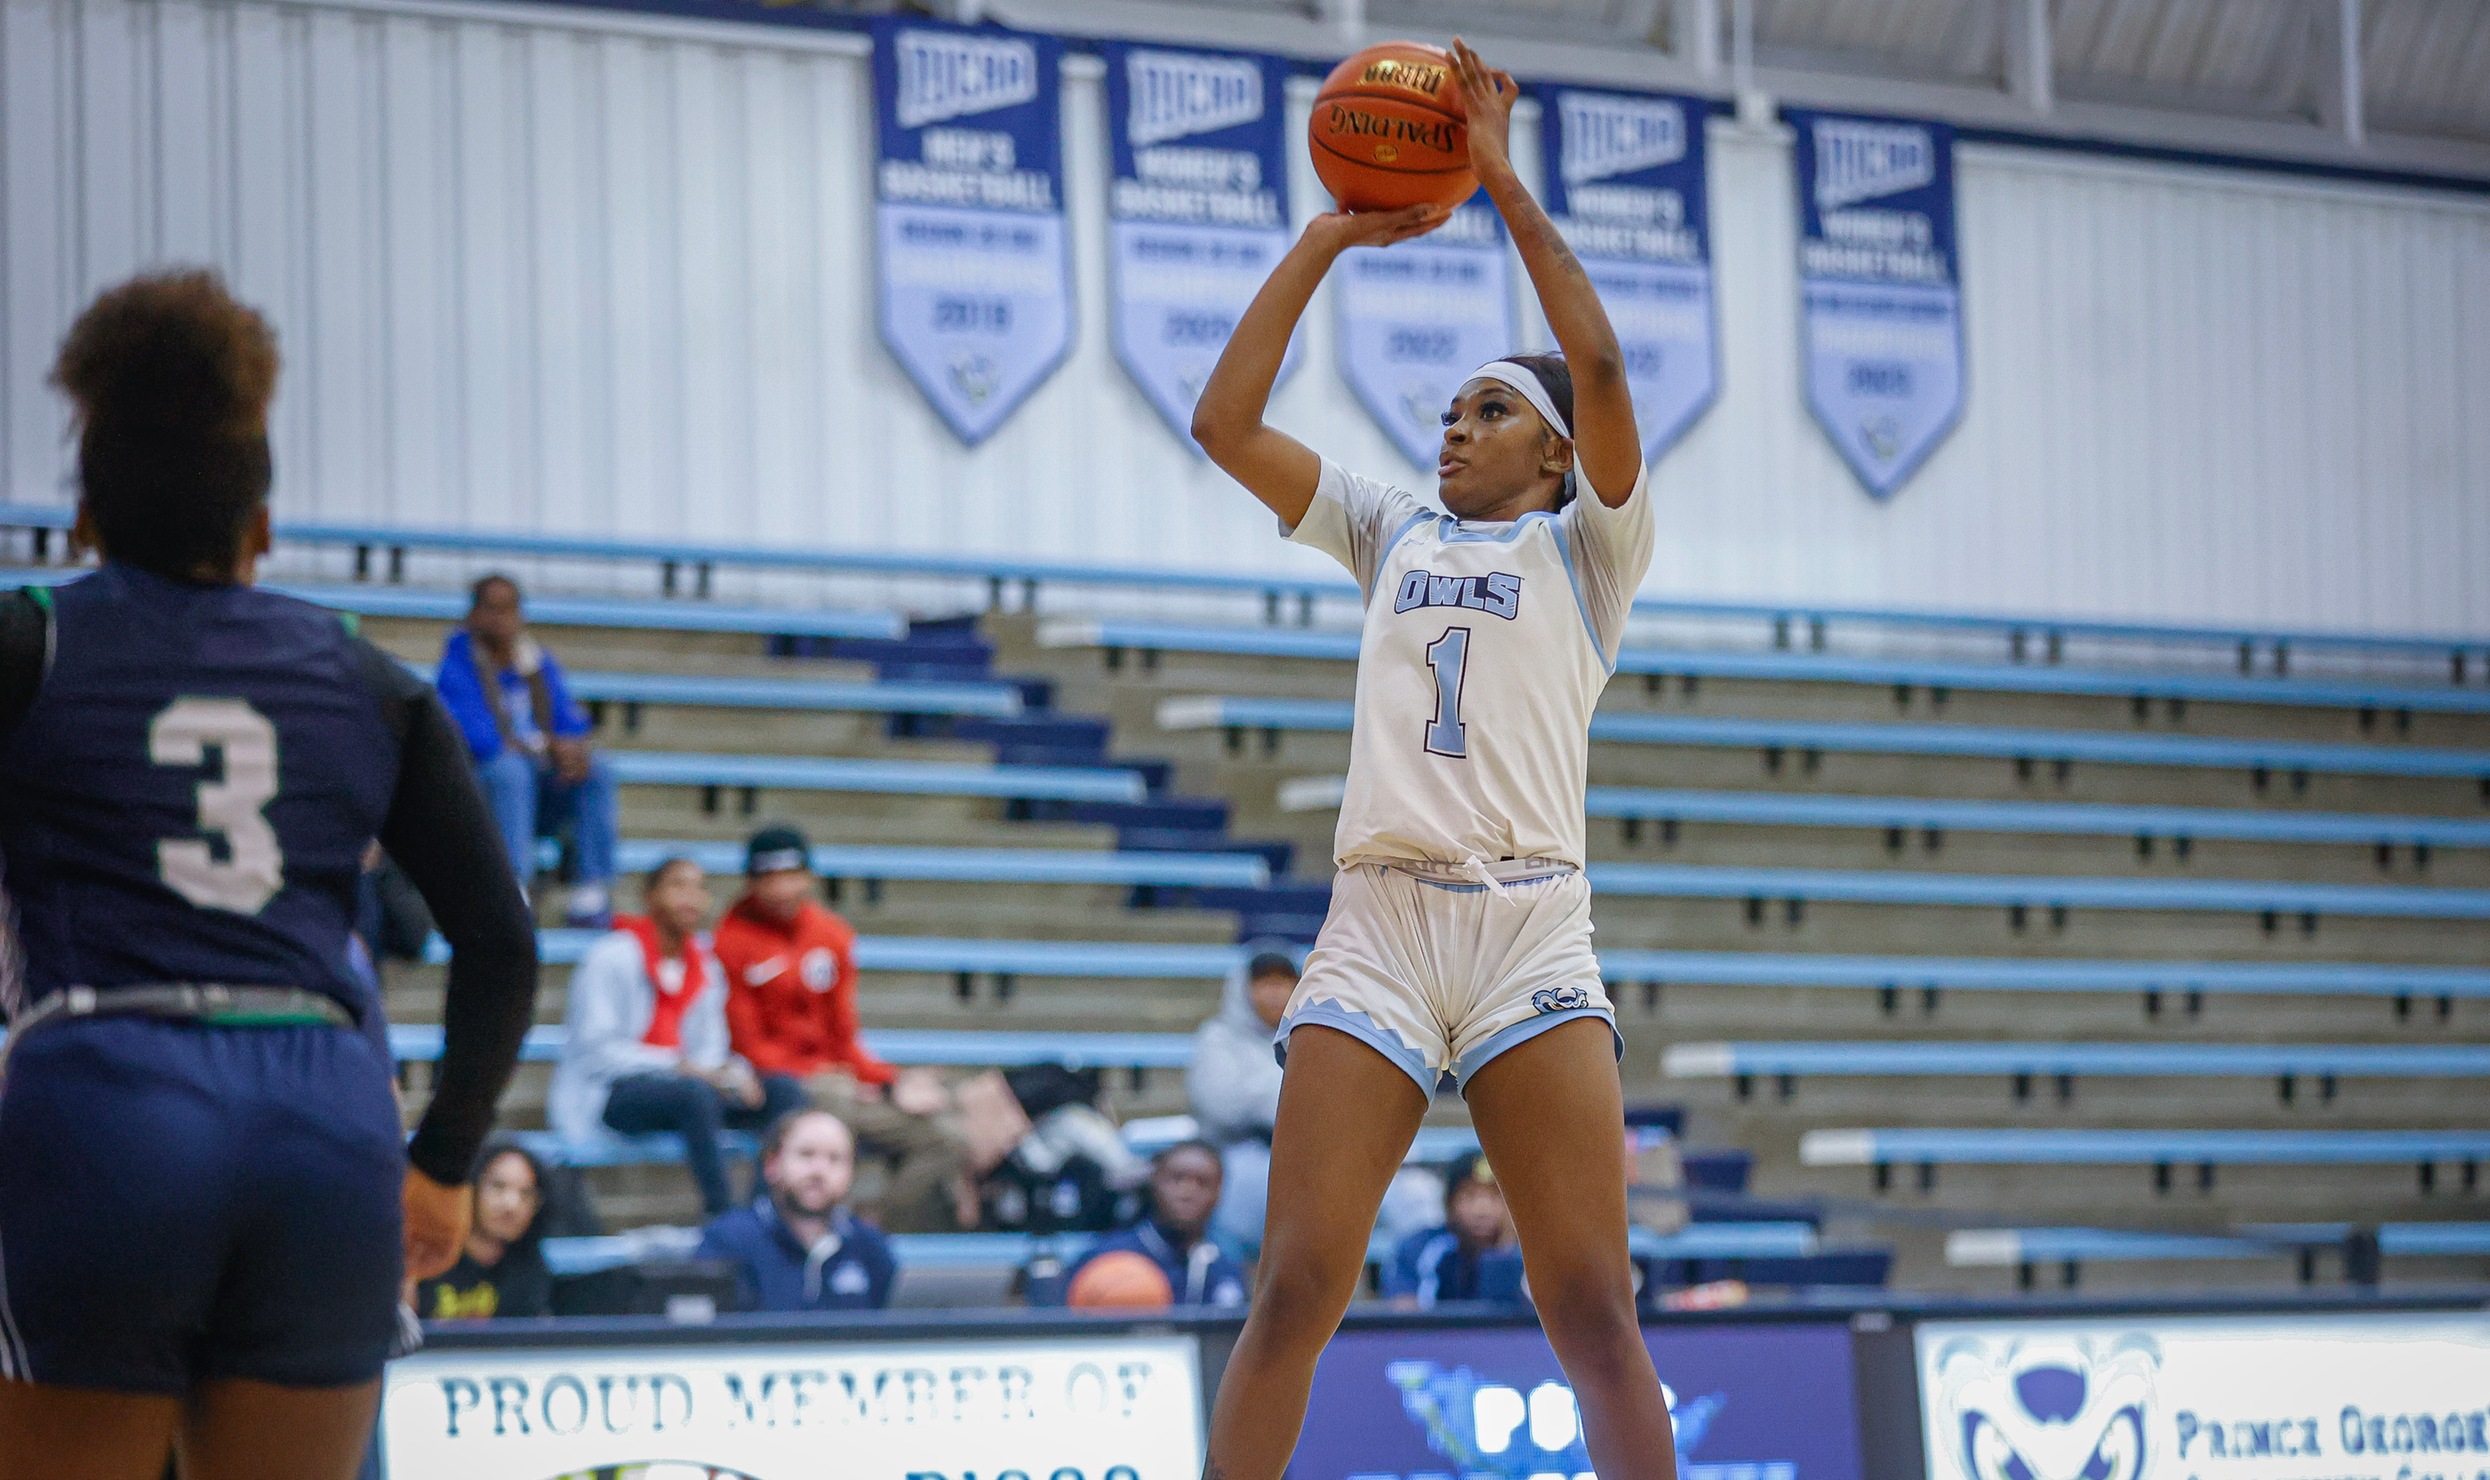 Women’s Basketball Dominates Harford By 40